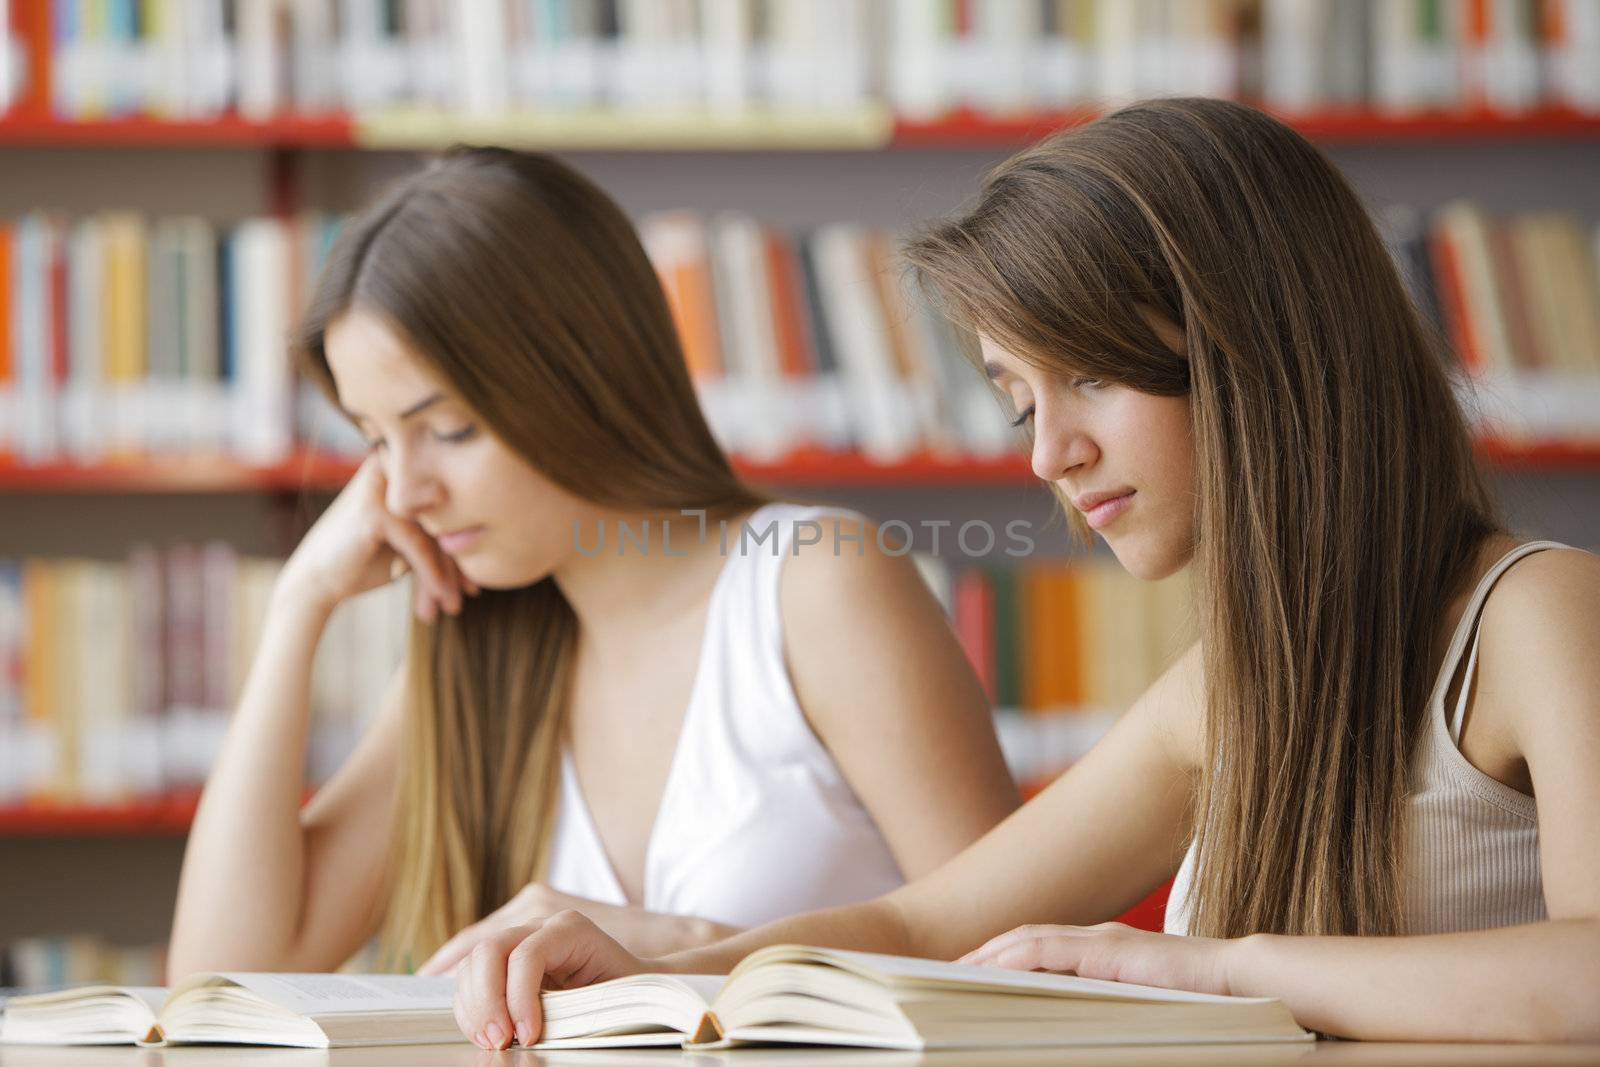 Candid capture of a pair of university students in the college library